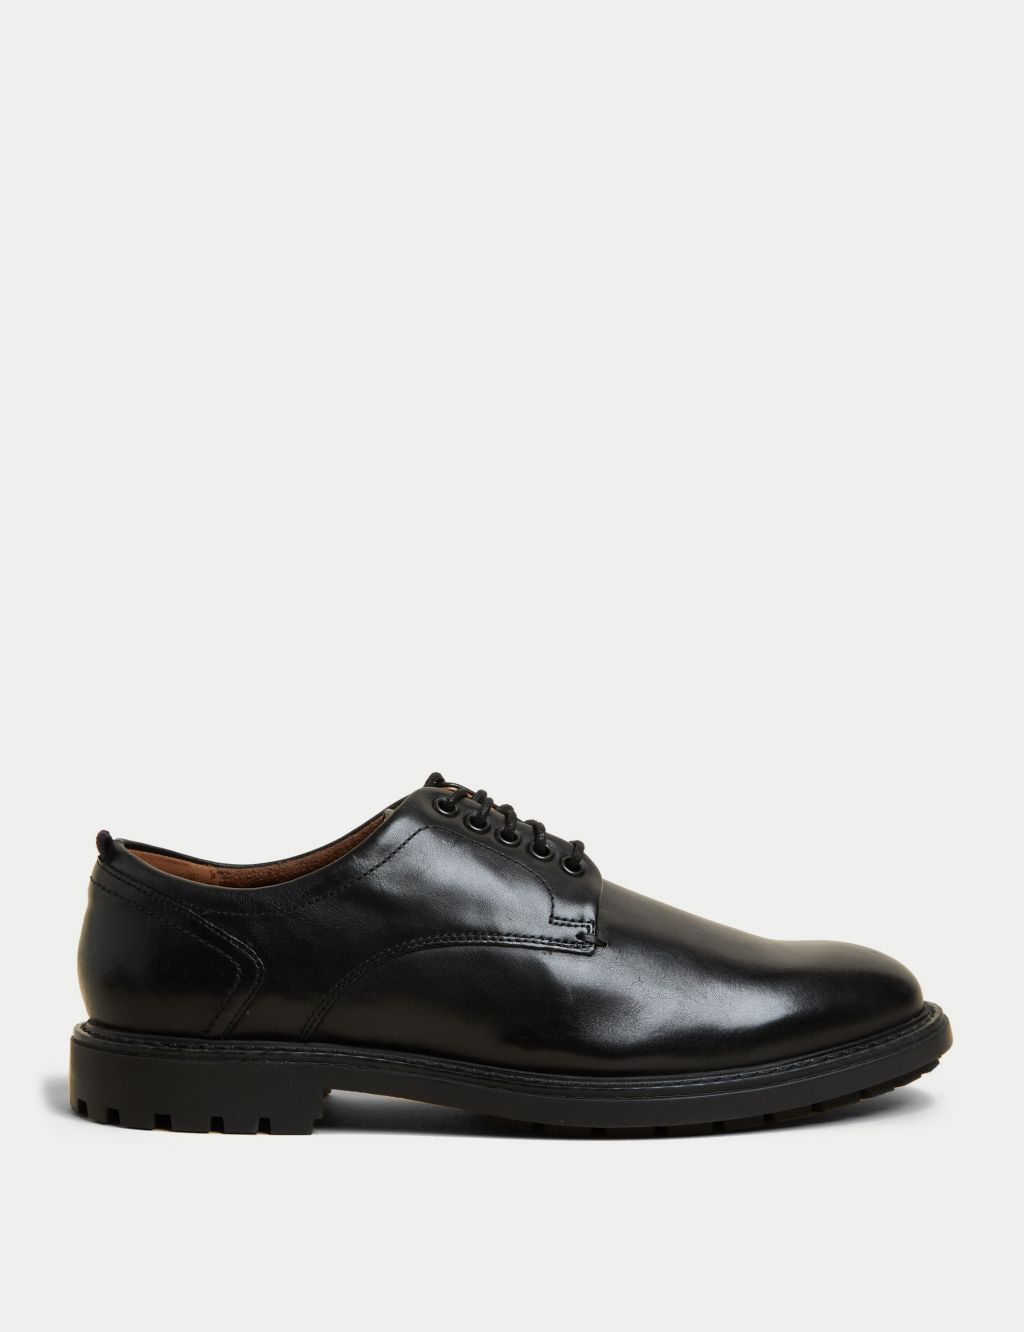 Wide Fit Leather Derby Shoes image 1